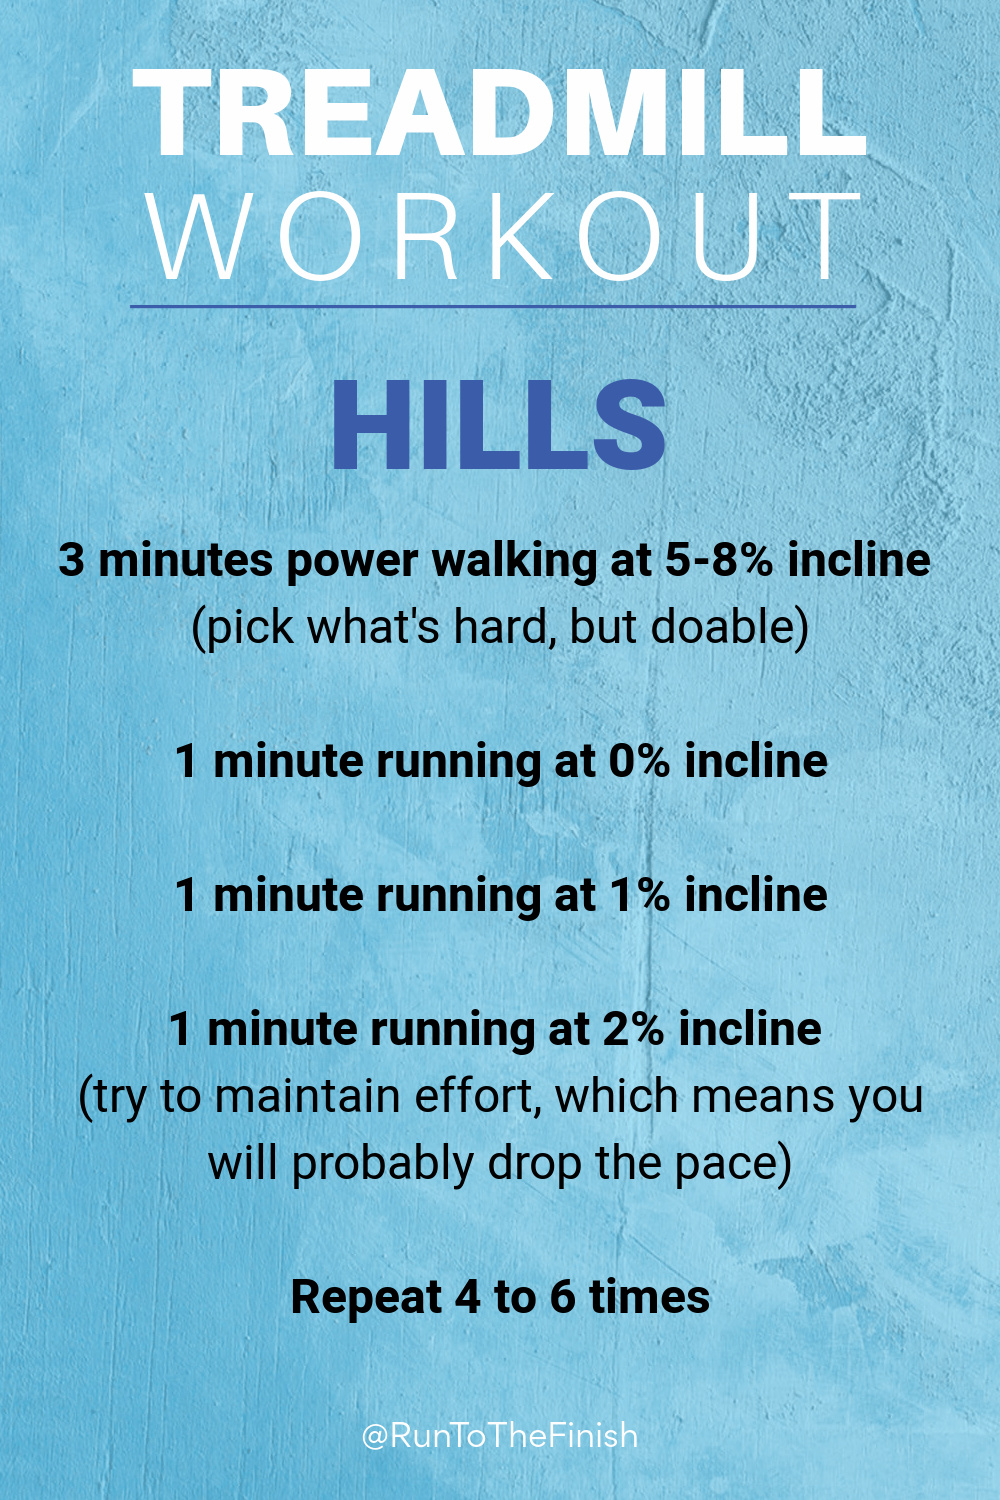 Hill Sprint Workout Routine - 3 Expert Tips (Benefits + Workouts)